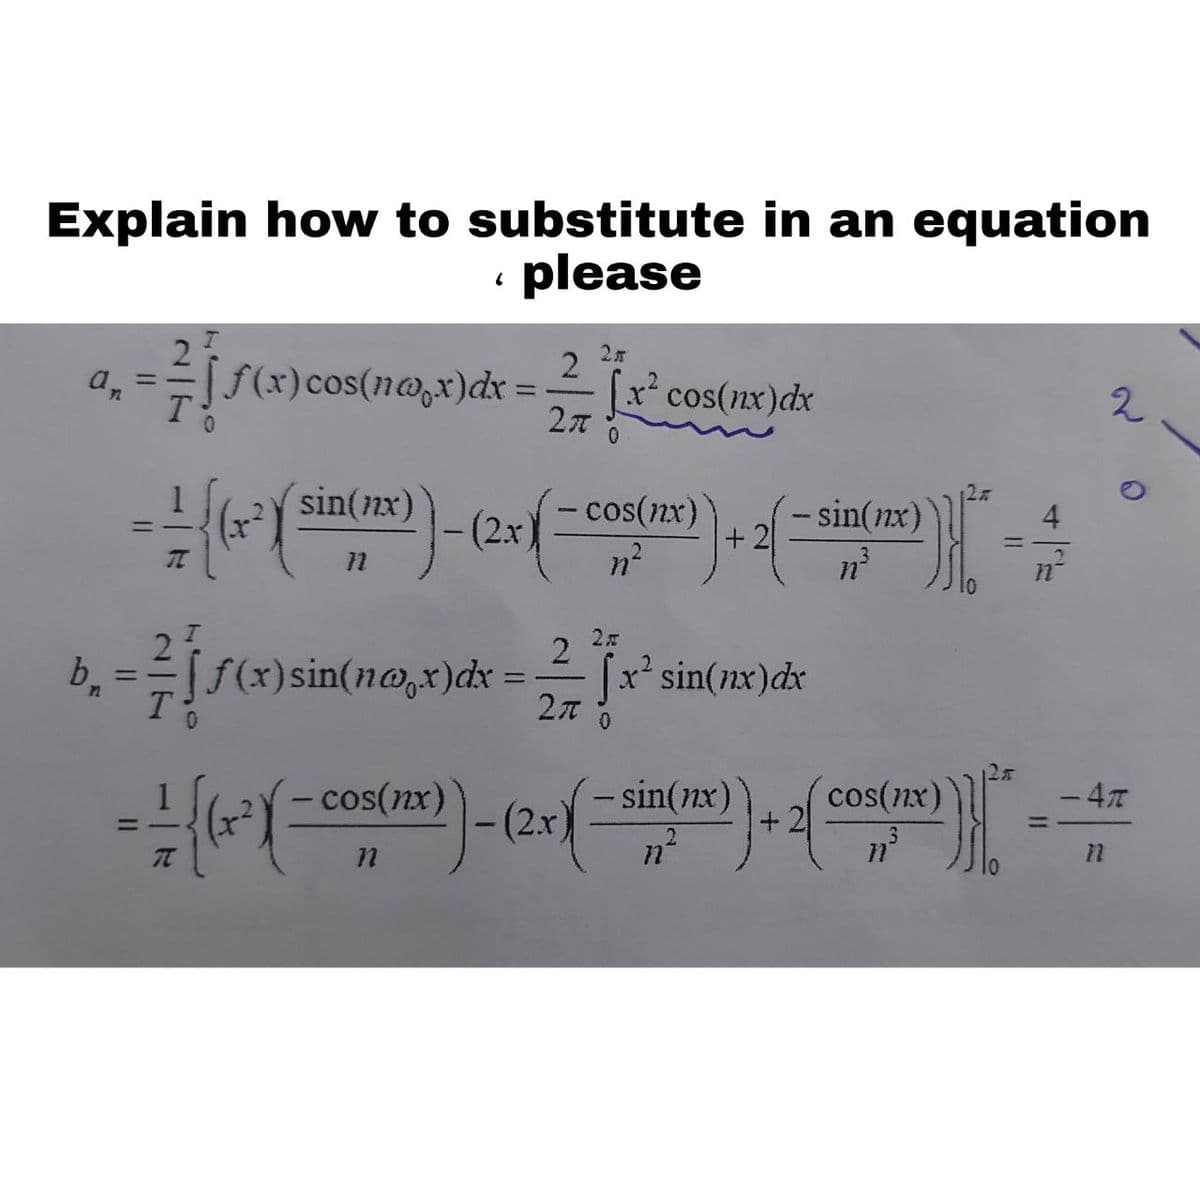 Explain how to substitute in an equation
please
a, ==f(x)cos(n@,x)dx
x* cos(nx)dx
2
sin(nx)
cos(nx)
sin(nx)
+ 2
-(2x)
%3D
%3D
11
3.
b.
[f(x)sin(n@,x)dx =- [
2
x* sin(nx)dx
- cos(nx)
- sin(nx)
cos(nx)
+ 2
-47
-(2.x)
%3D
11
2/7
